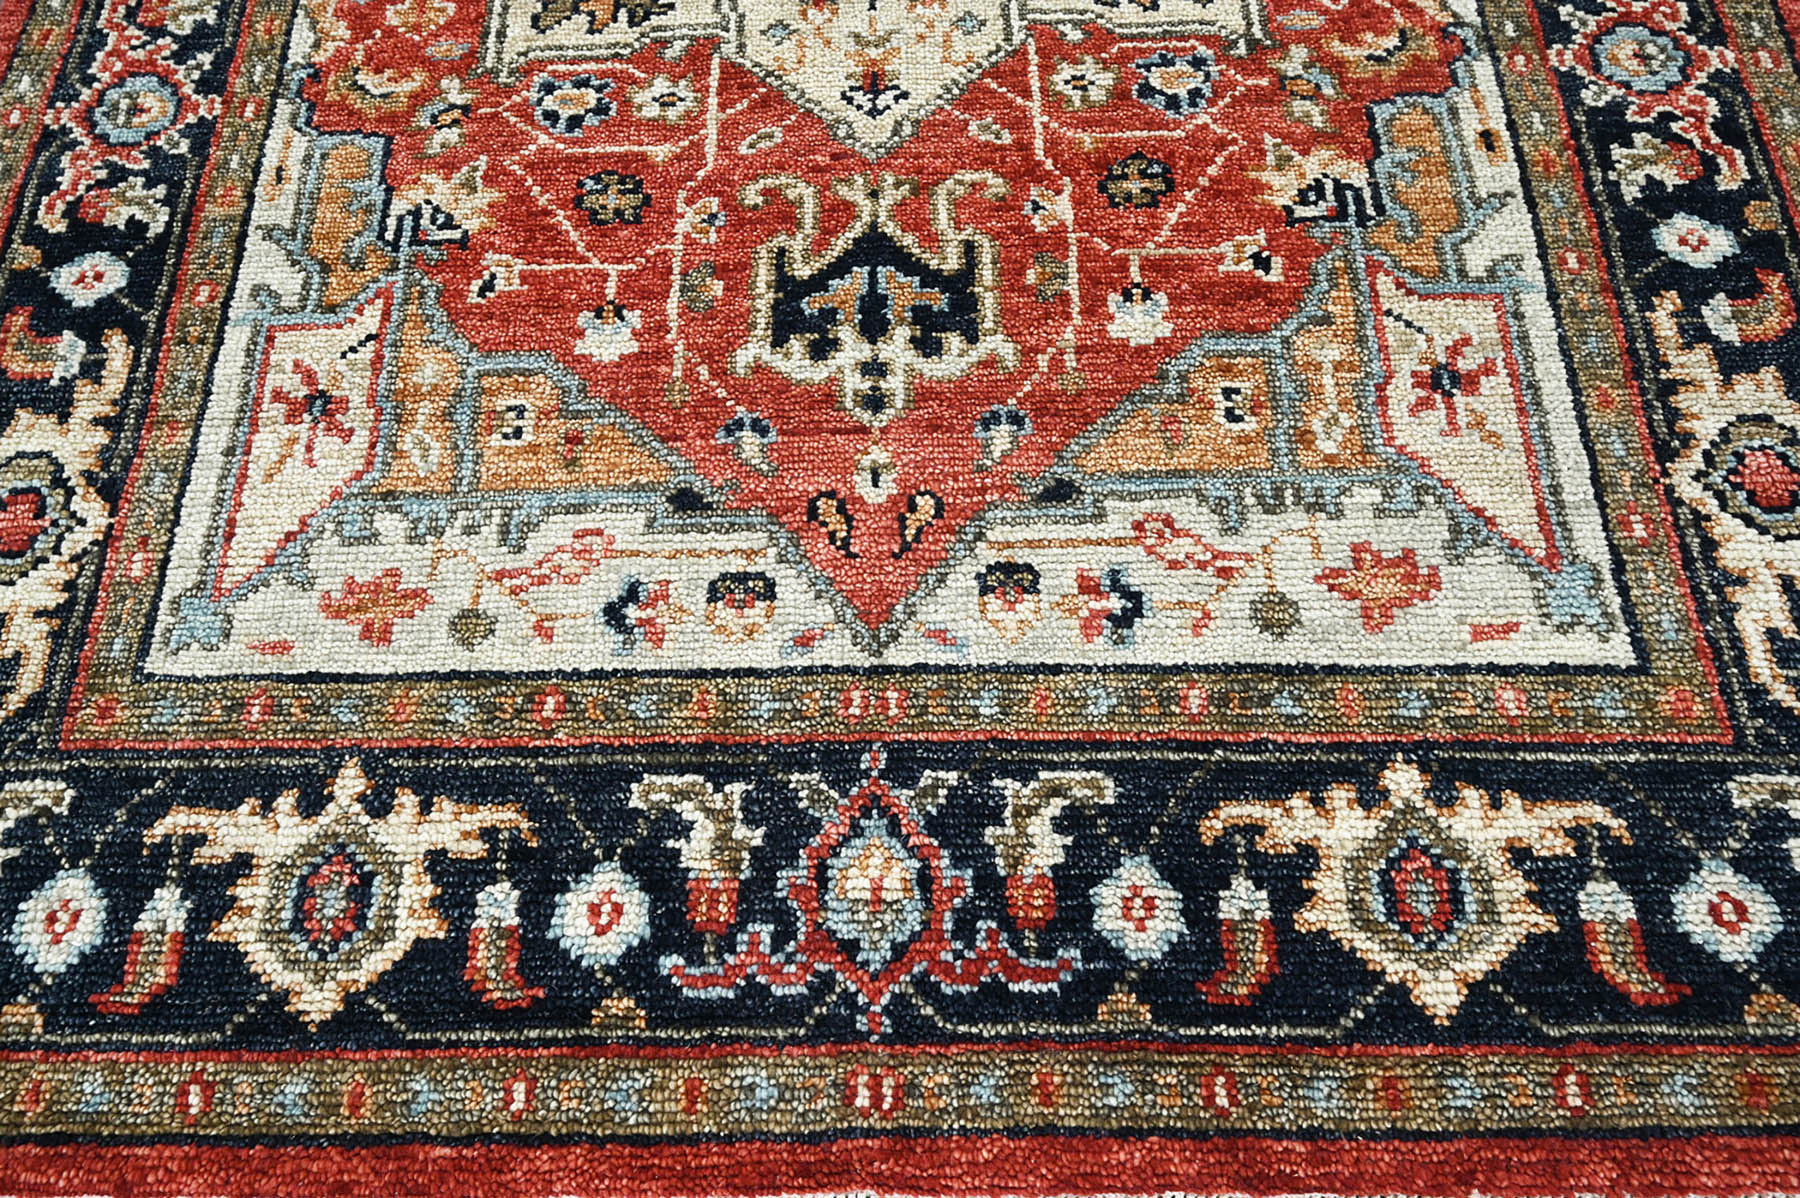 Lesesne 6x9 Rust LoomBloom Hand Knotted Arts & Crafts Oushak 100% Wool Oriental Area Rug